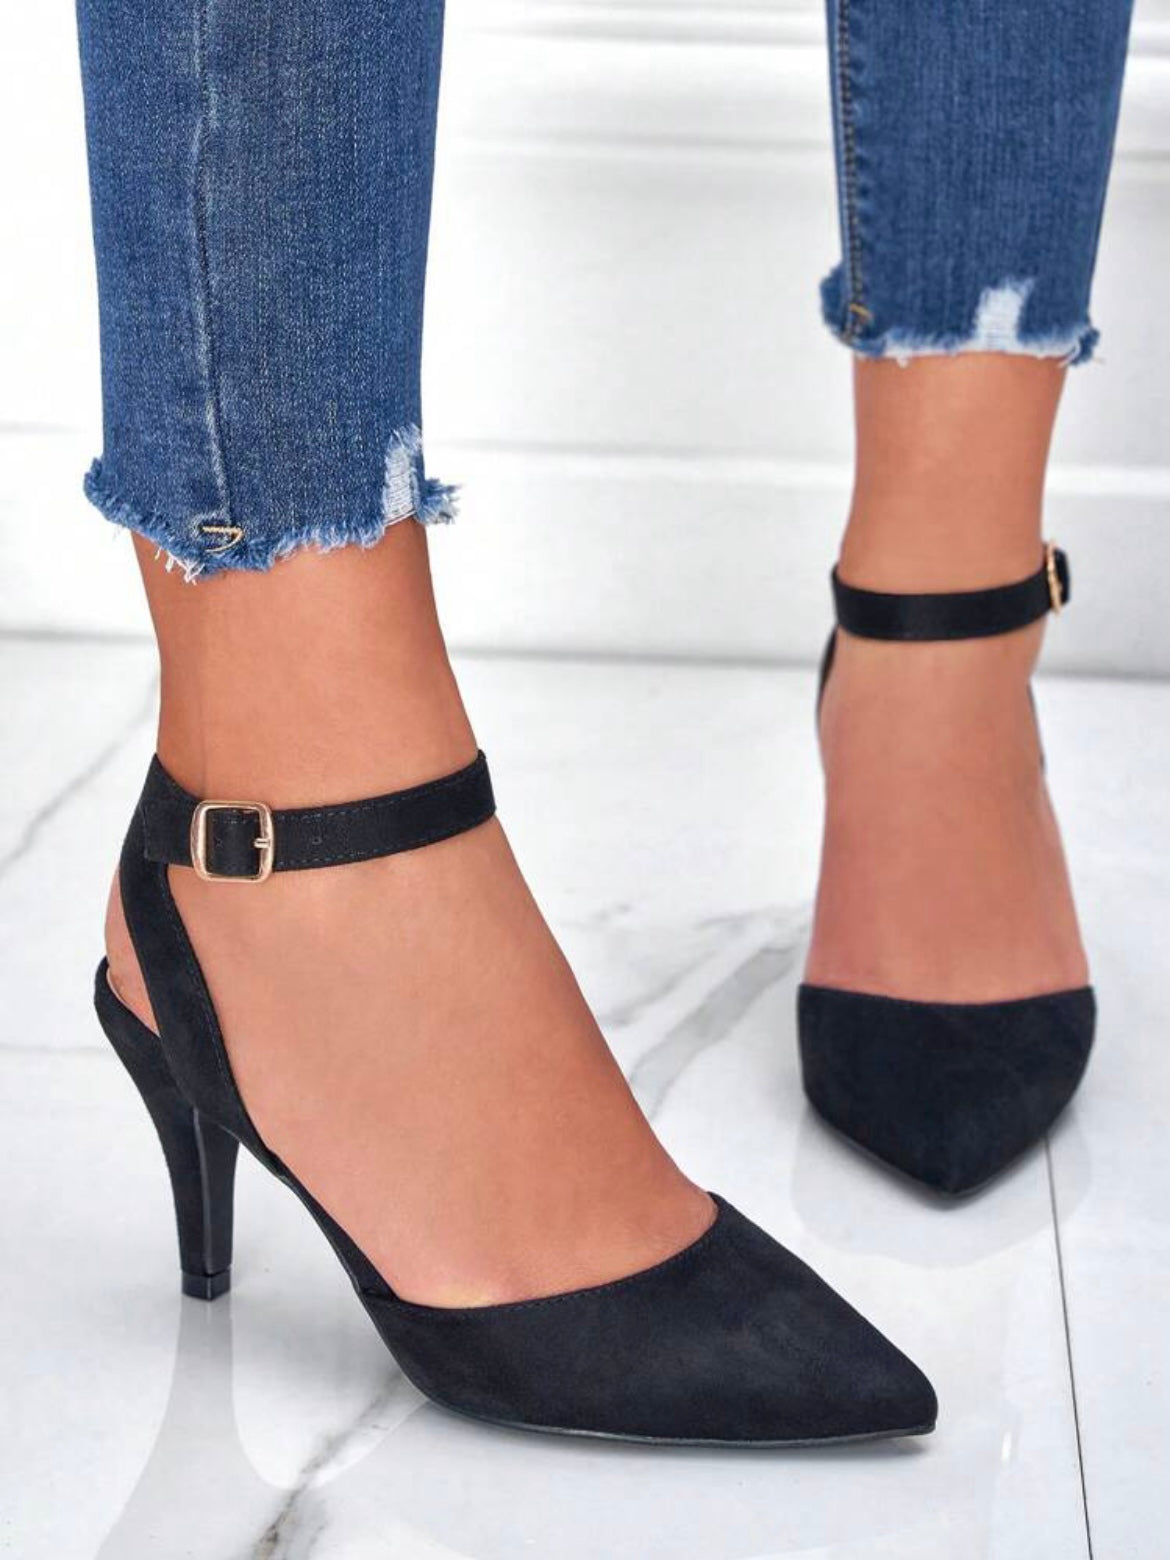 Ankle Strap High Heels